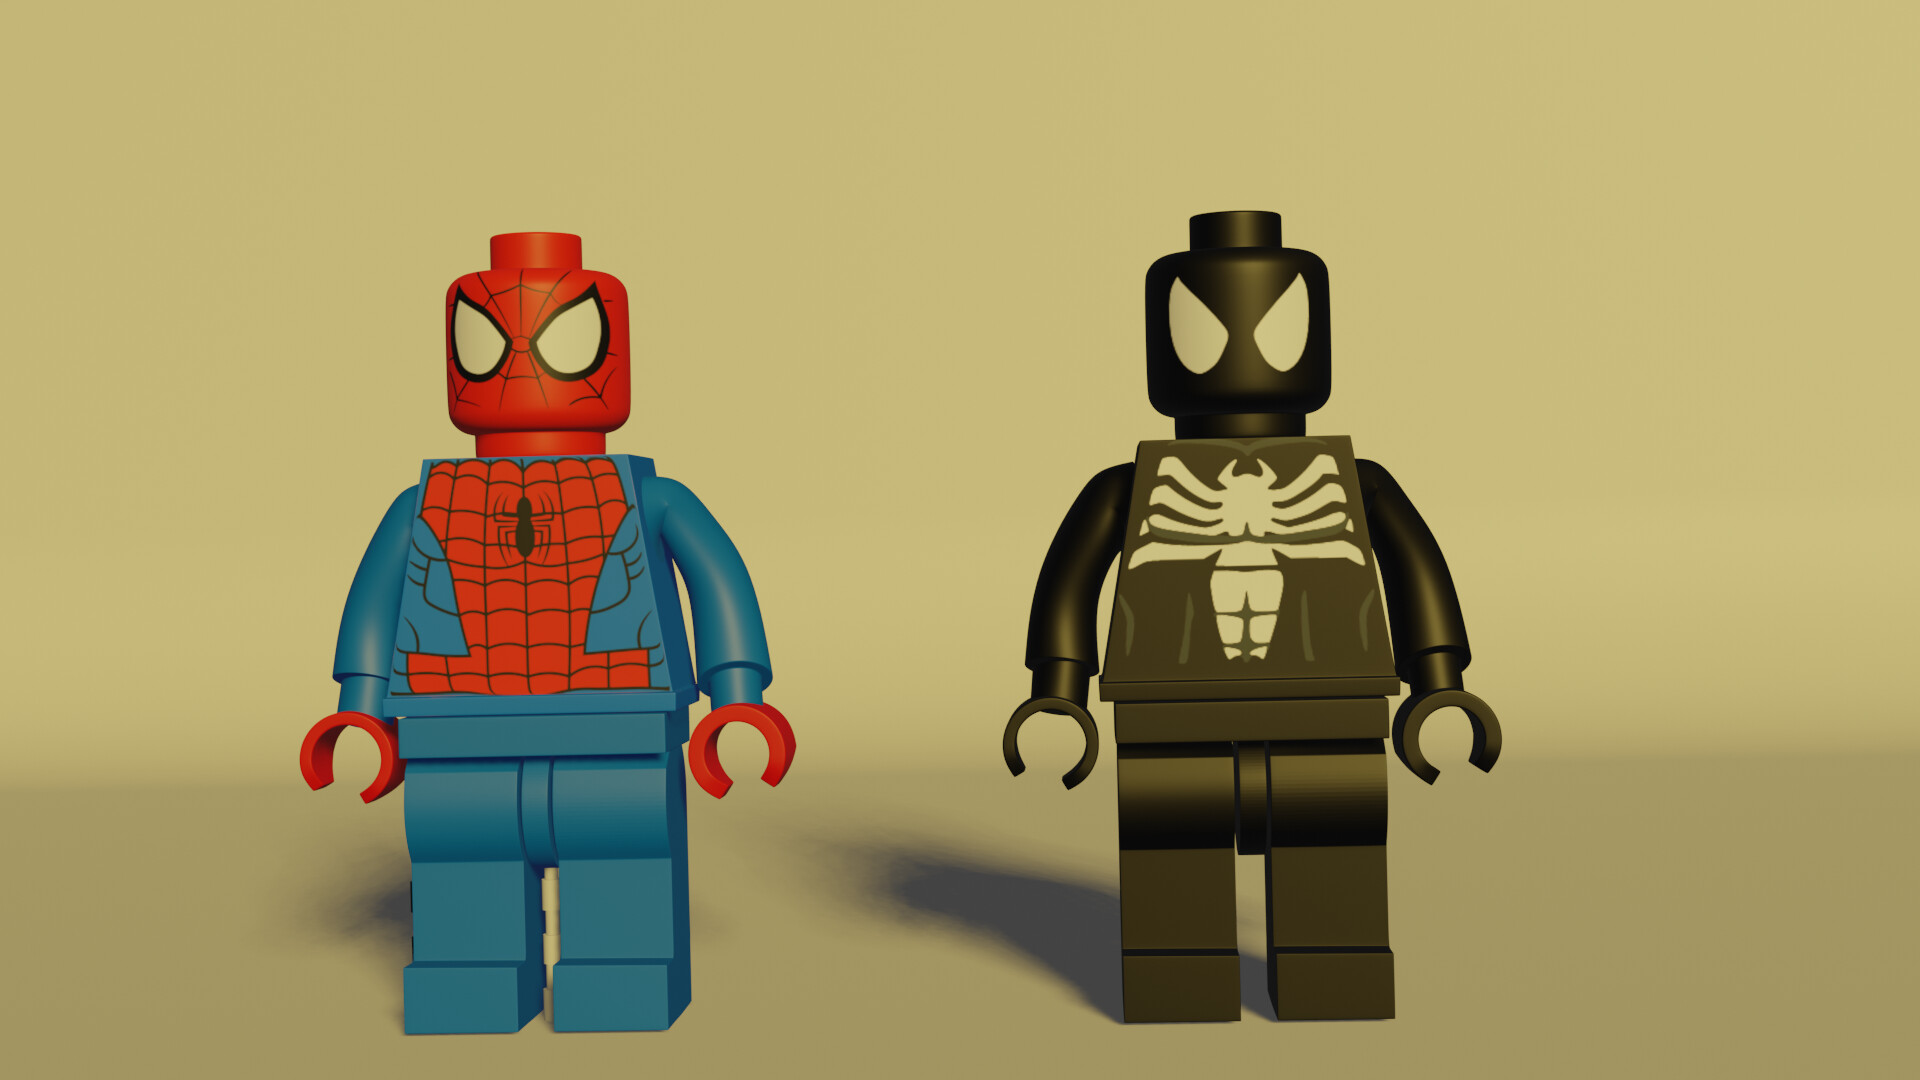 ArtStation - Lego Suit and Normal Suit Spider-Man